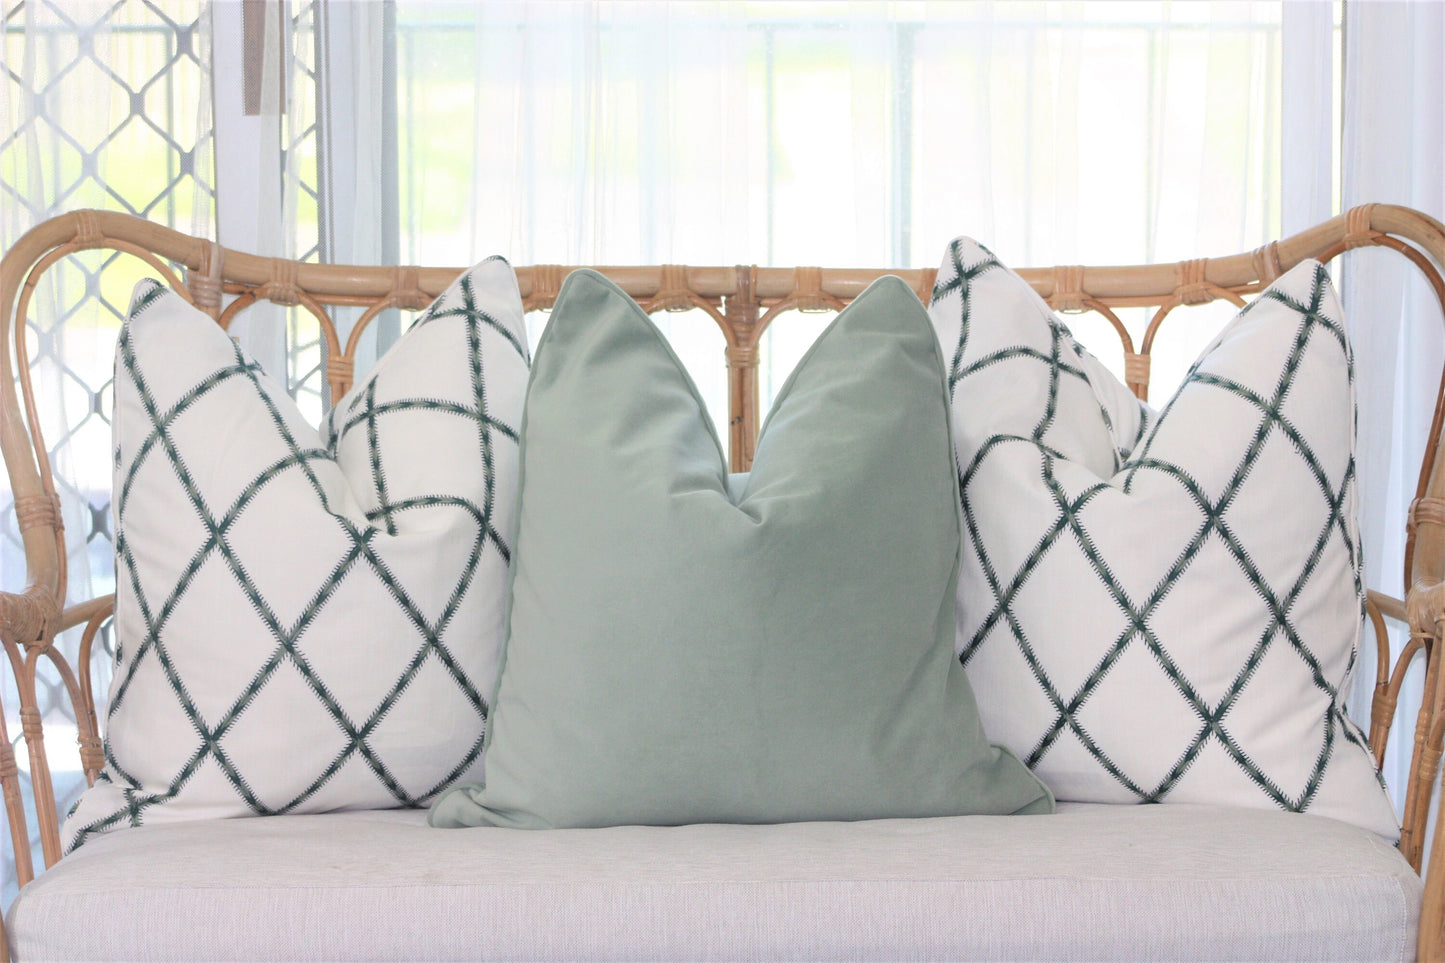 AUBREY Cushion Cover and bed runners